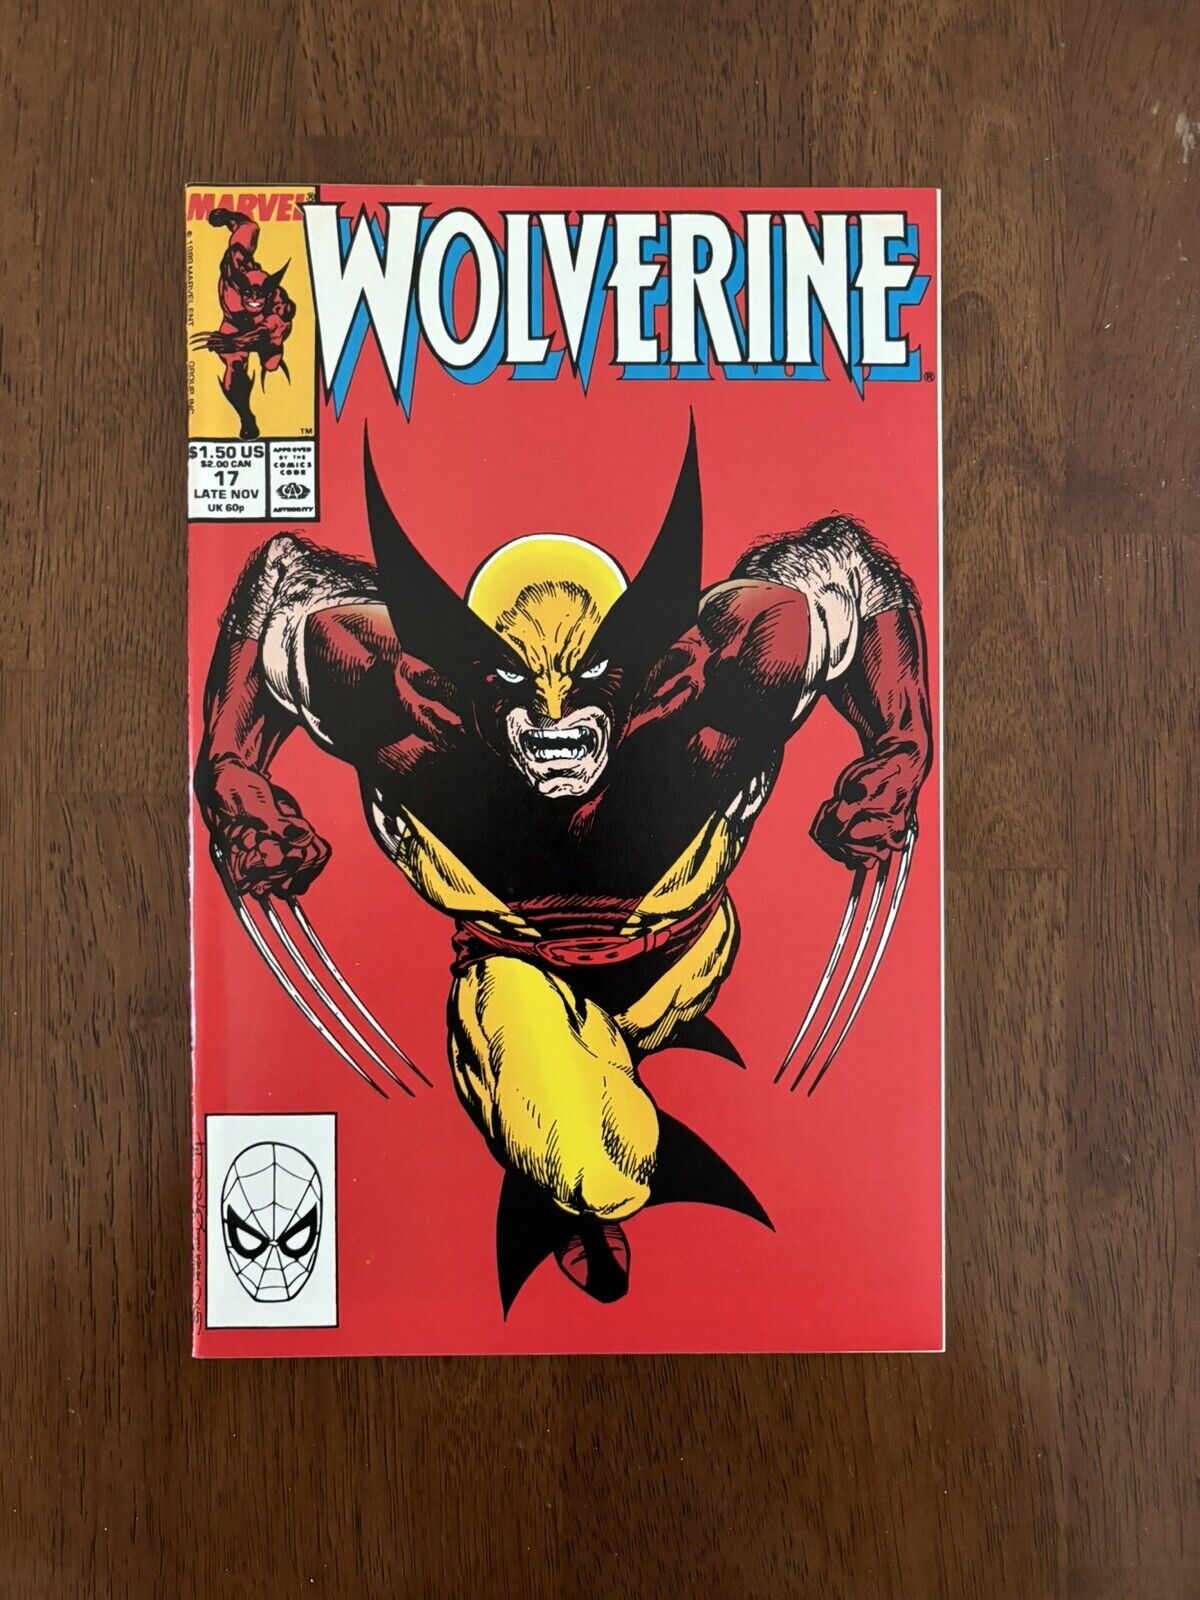 Wolverine #17 (Marvel, 1989) Classic cover by John Byrne NM